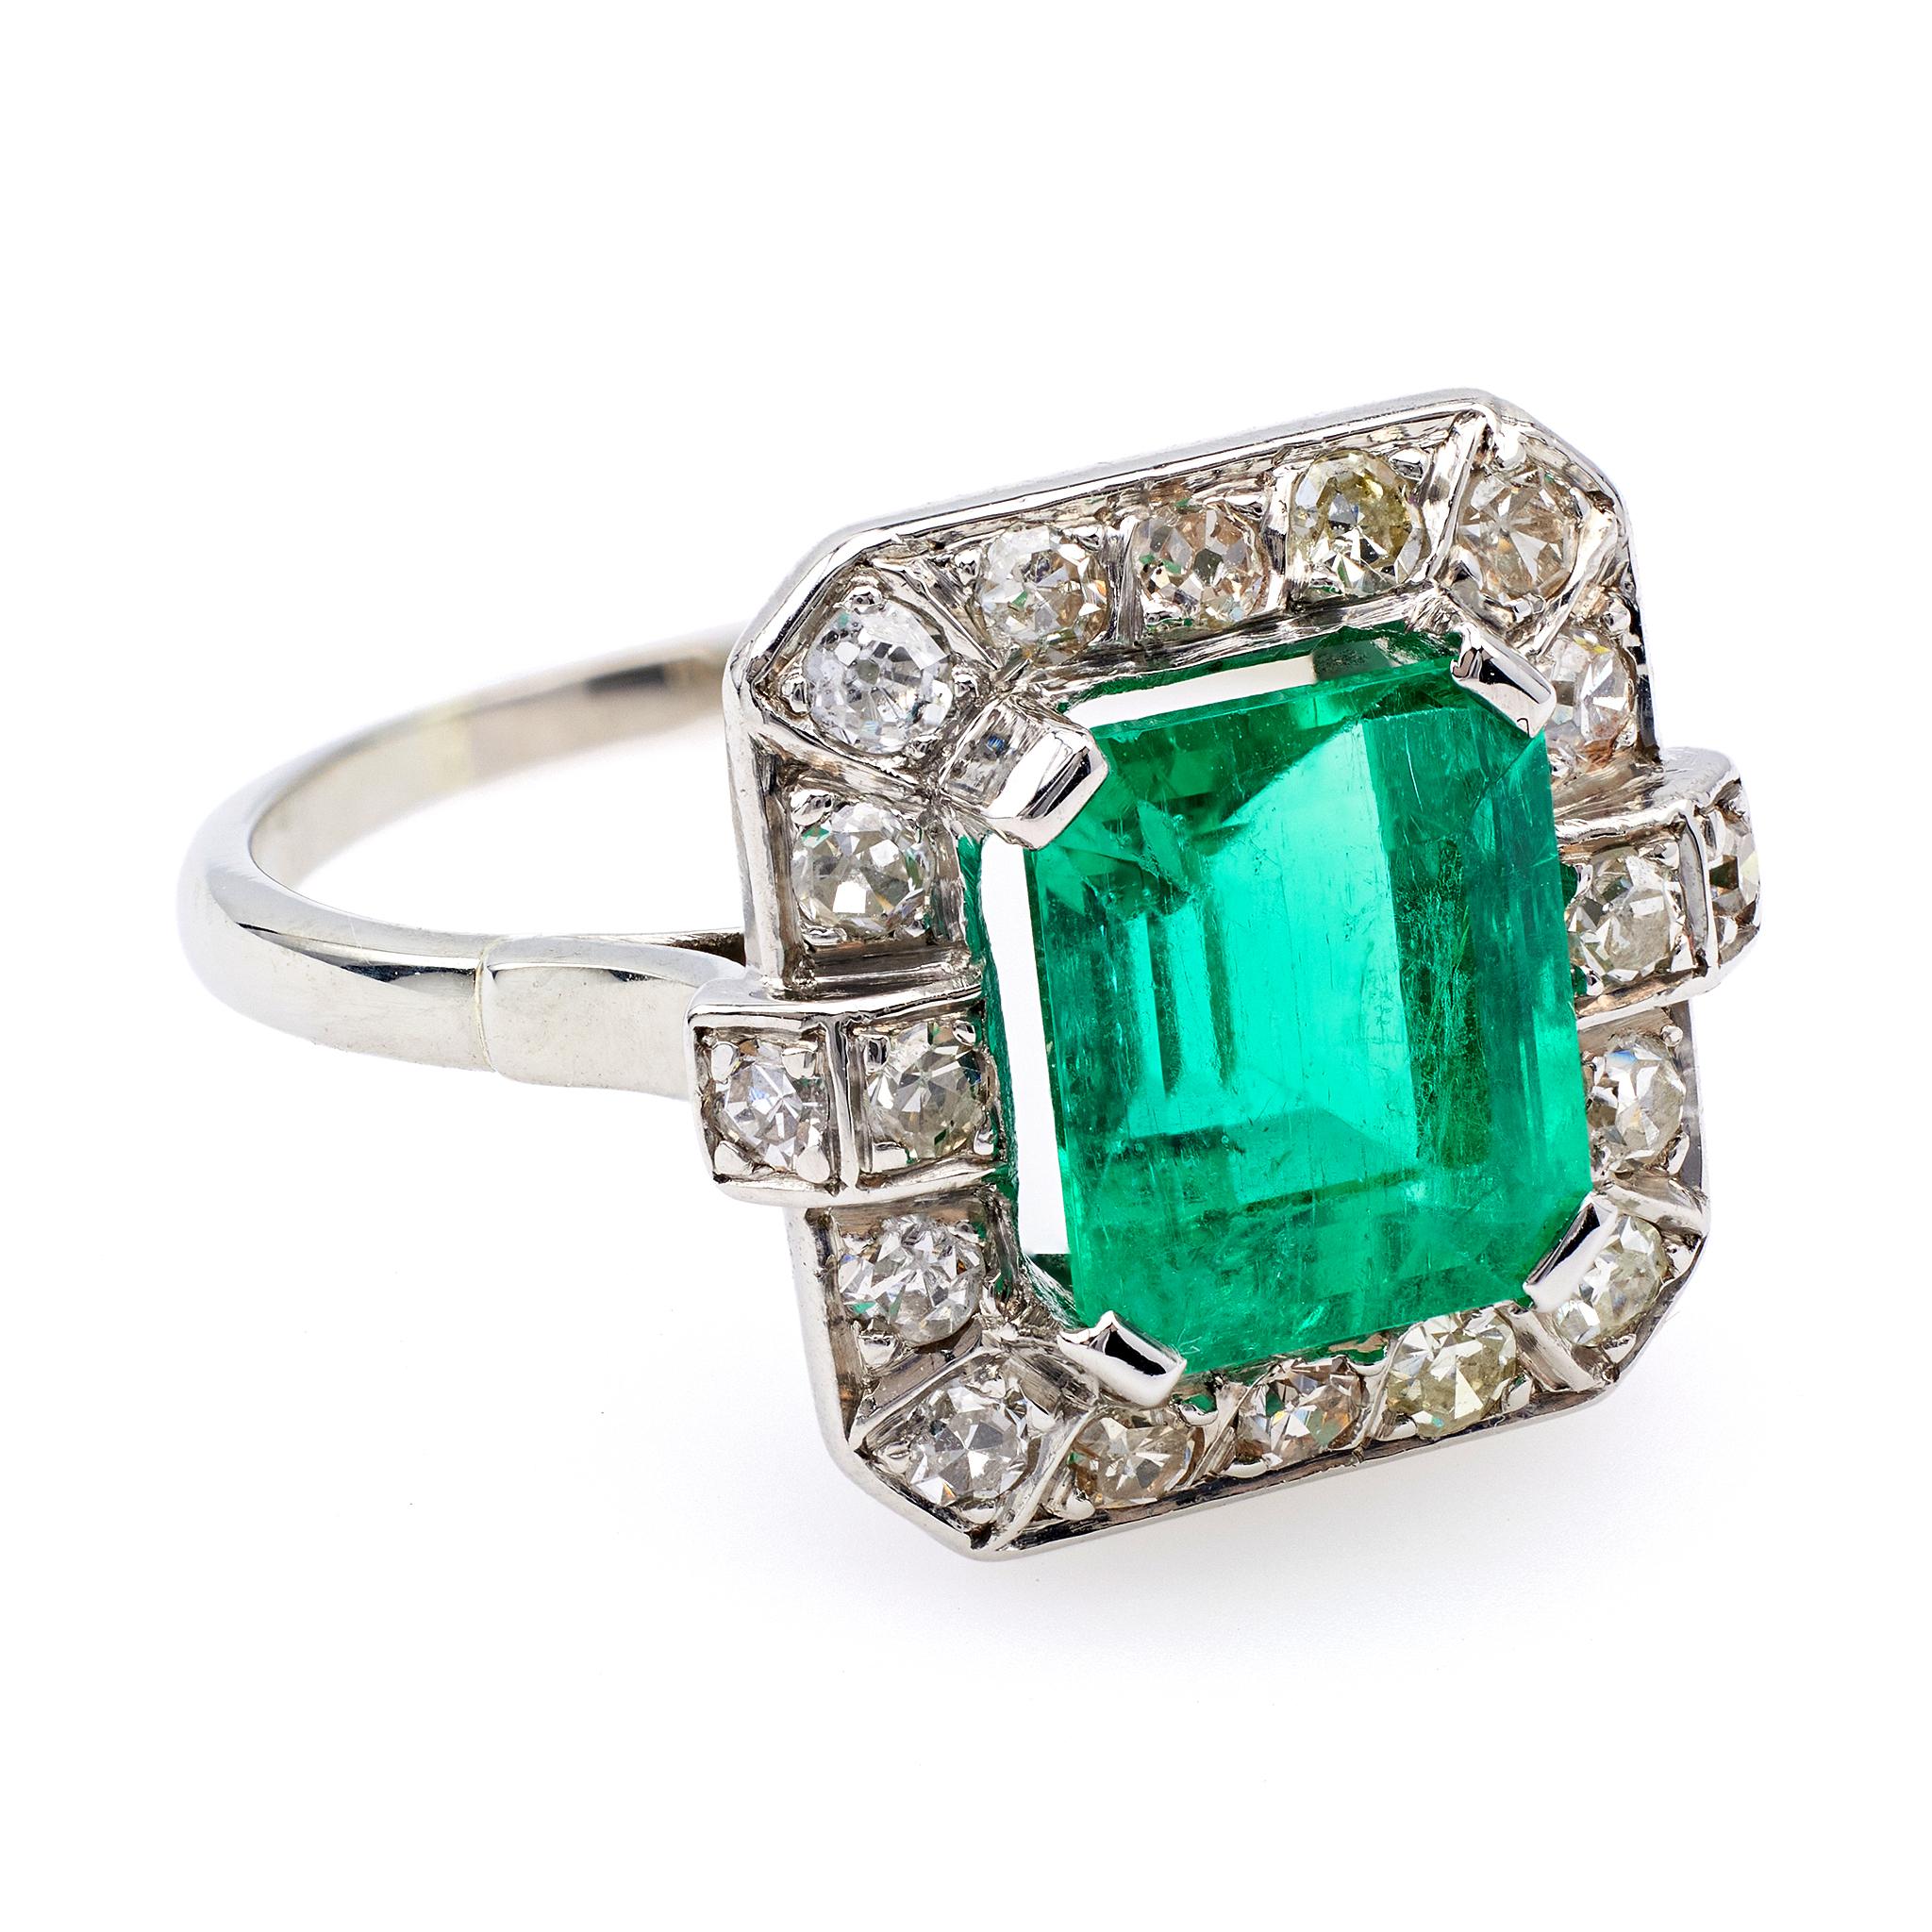 Women's or Men's Art Deco GIA 2.27 Carat Colombian Emerald and Diamond 18k White Gold Halo Ring For Sale